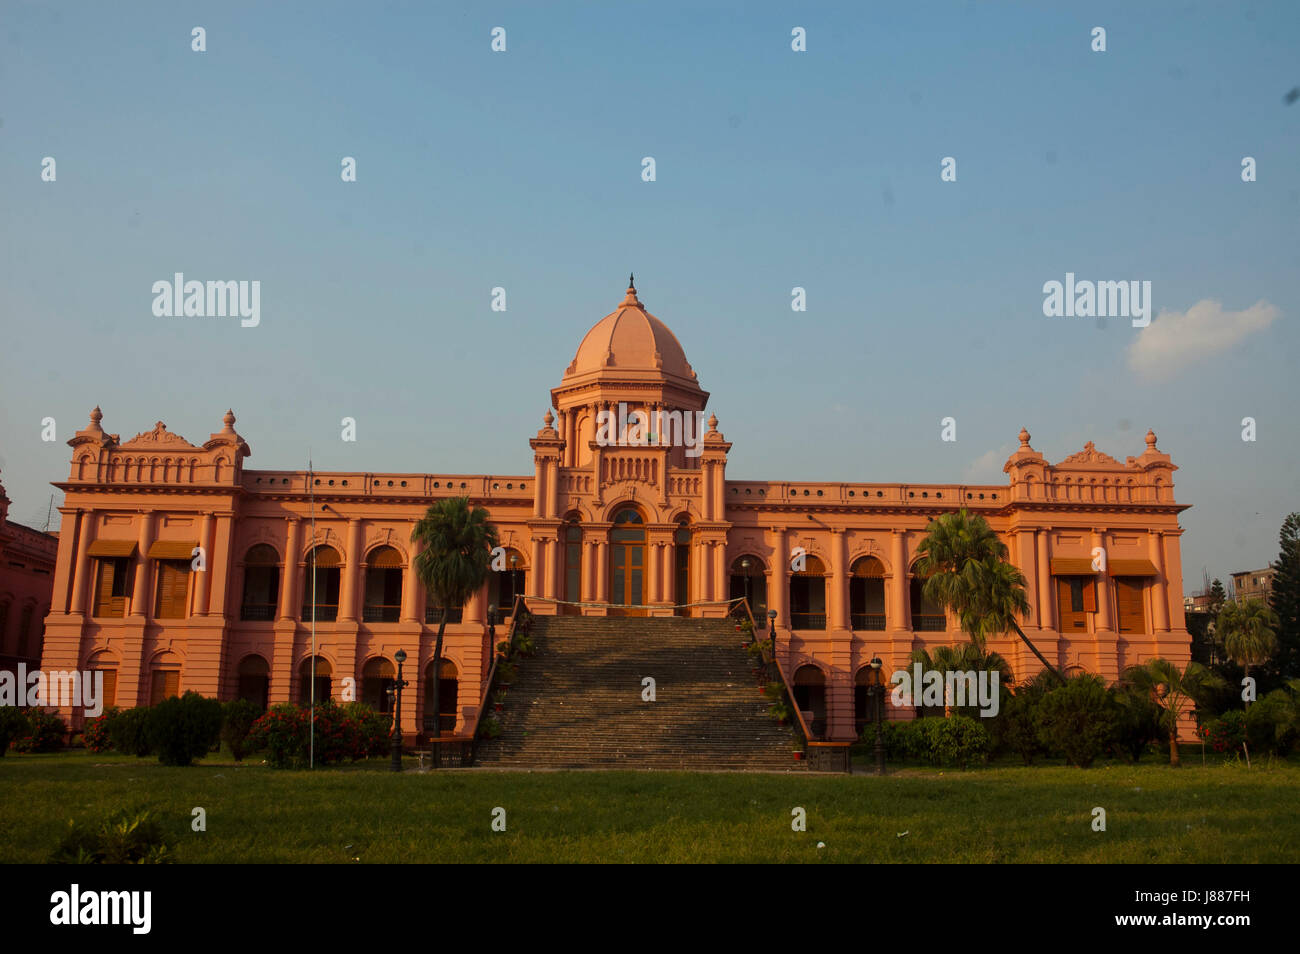 The historic Ahsan Manjil, is situated in Kumartoli, on the bank of the Buriganga river, in Dhaka, Bangladesh. It had been used as the residential pal Stock Photo